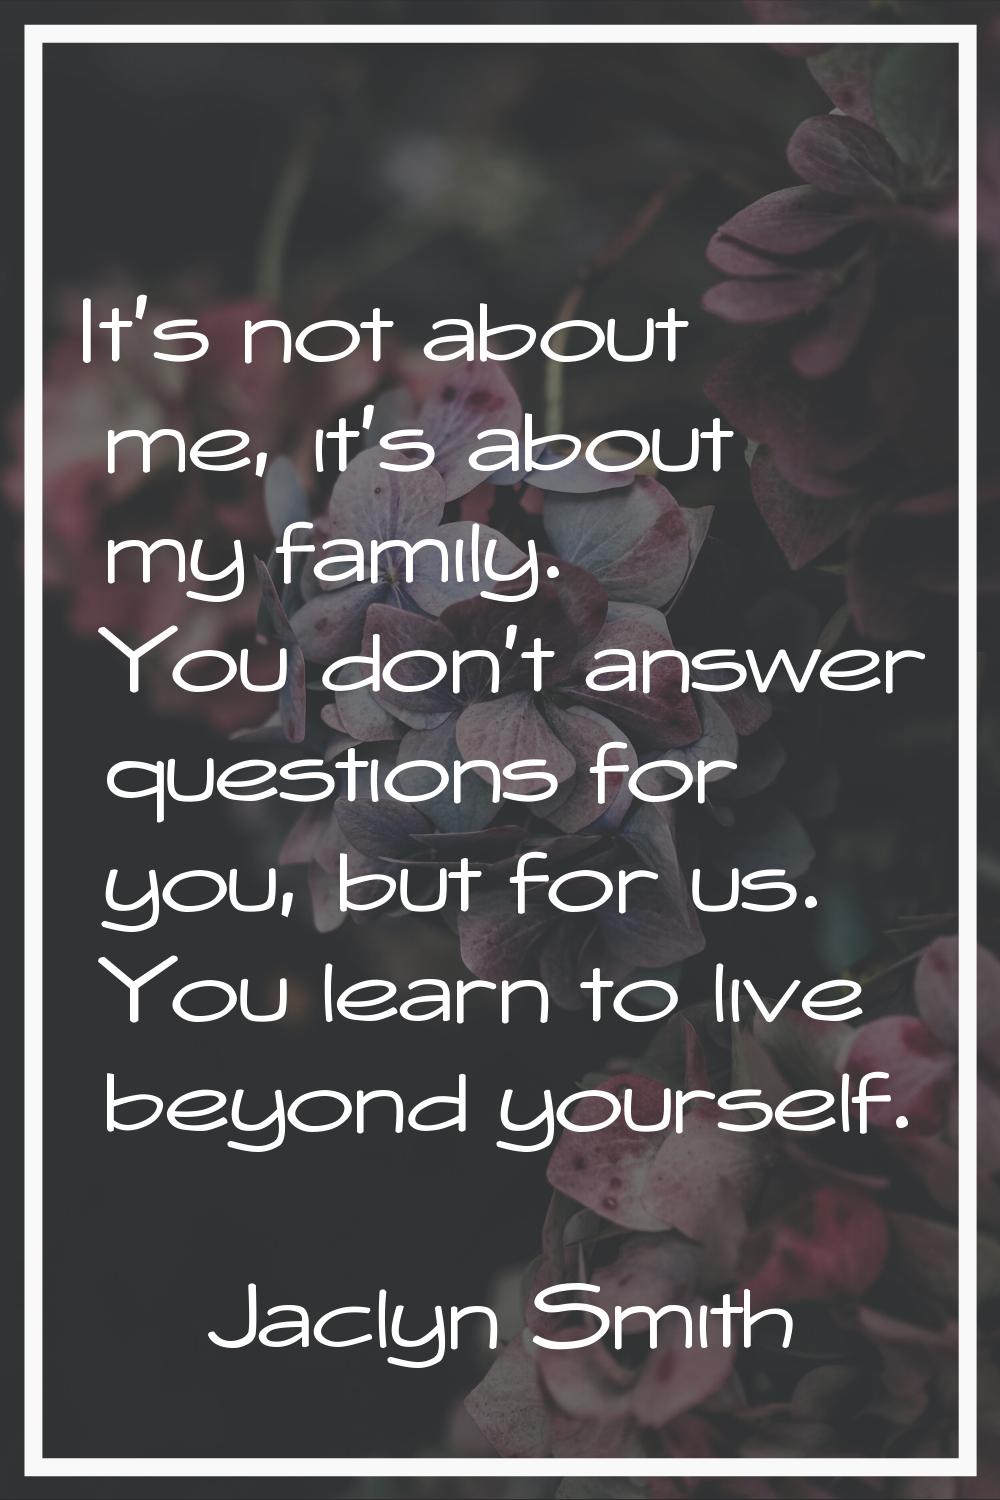 It's not about me, it's about my family. You don't answer questions for you, but for us. You learn 